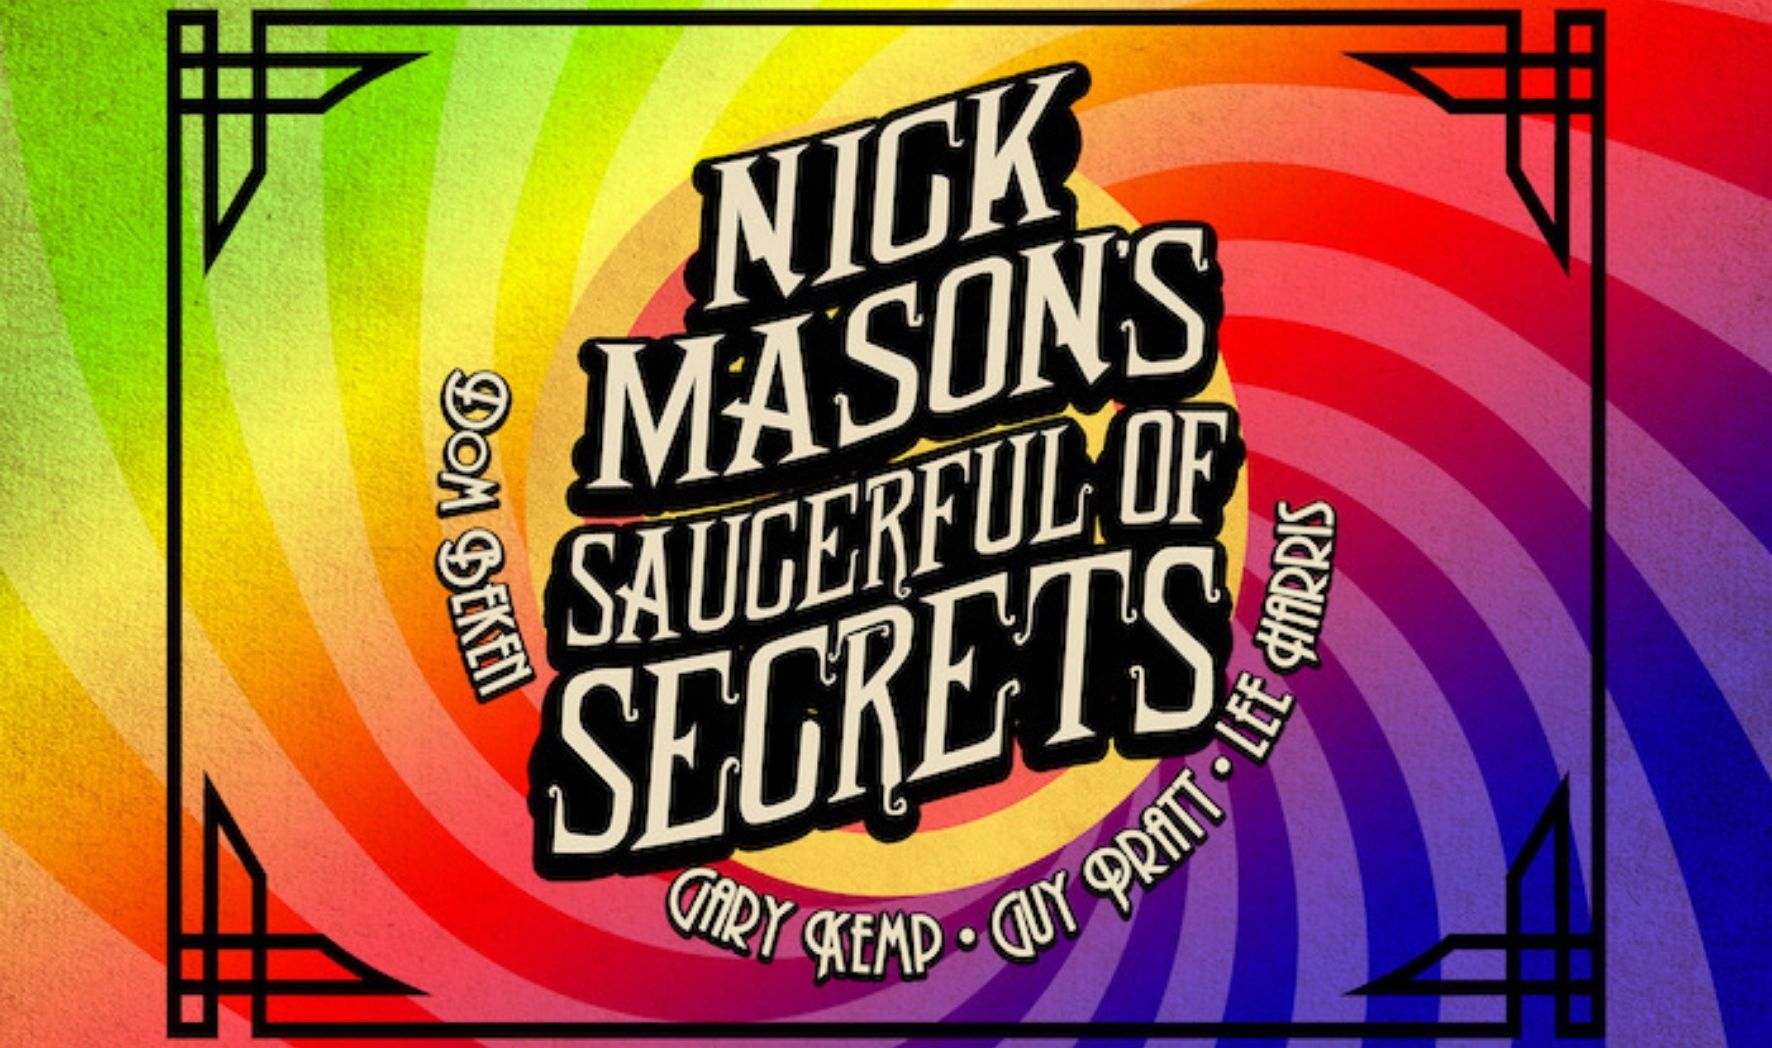 More Info for Nick Mason's Saucerful of Secrets